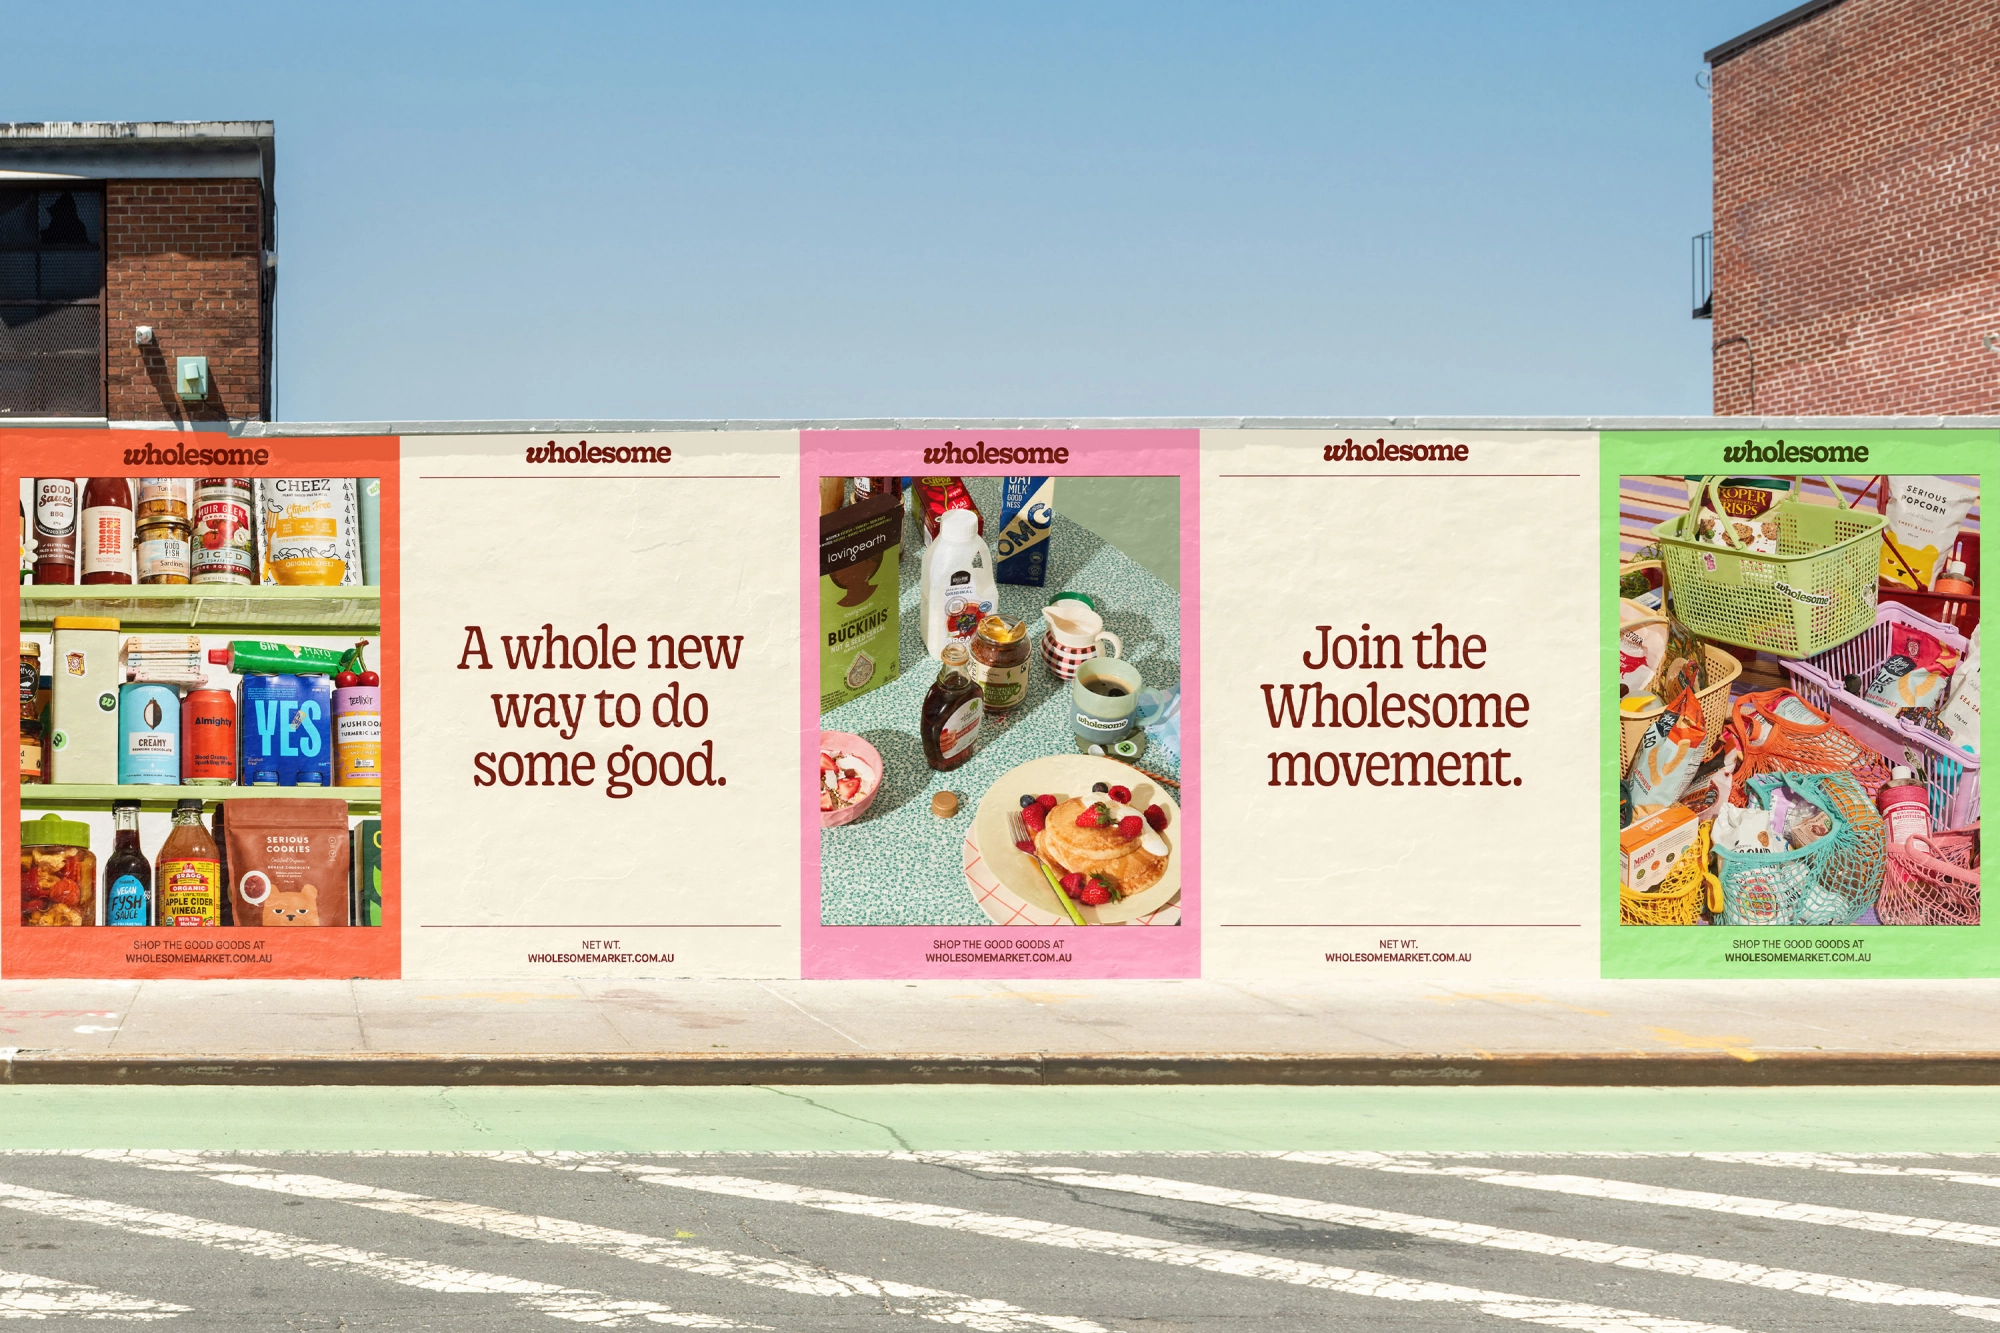 Art direction, copywriting and poster design for Australian online grocer Wholesome designed by Universal Favourite